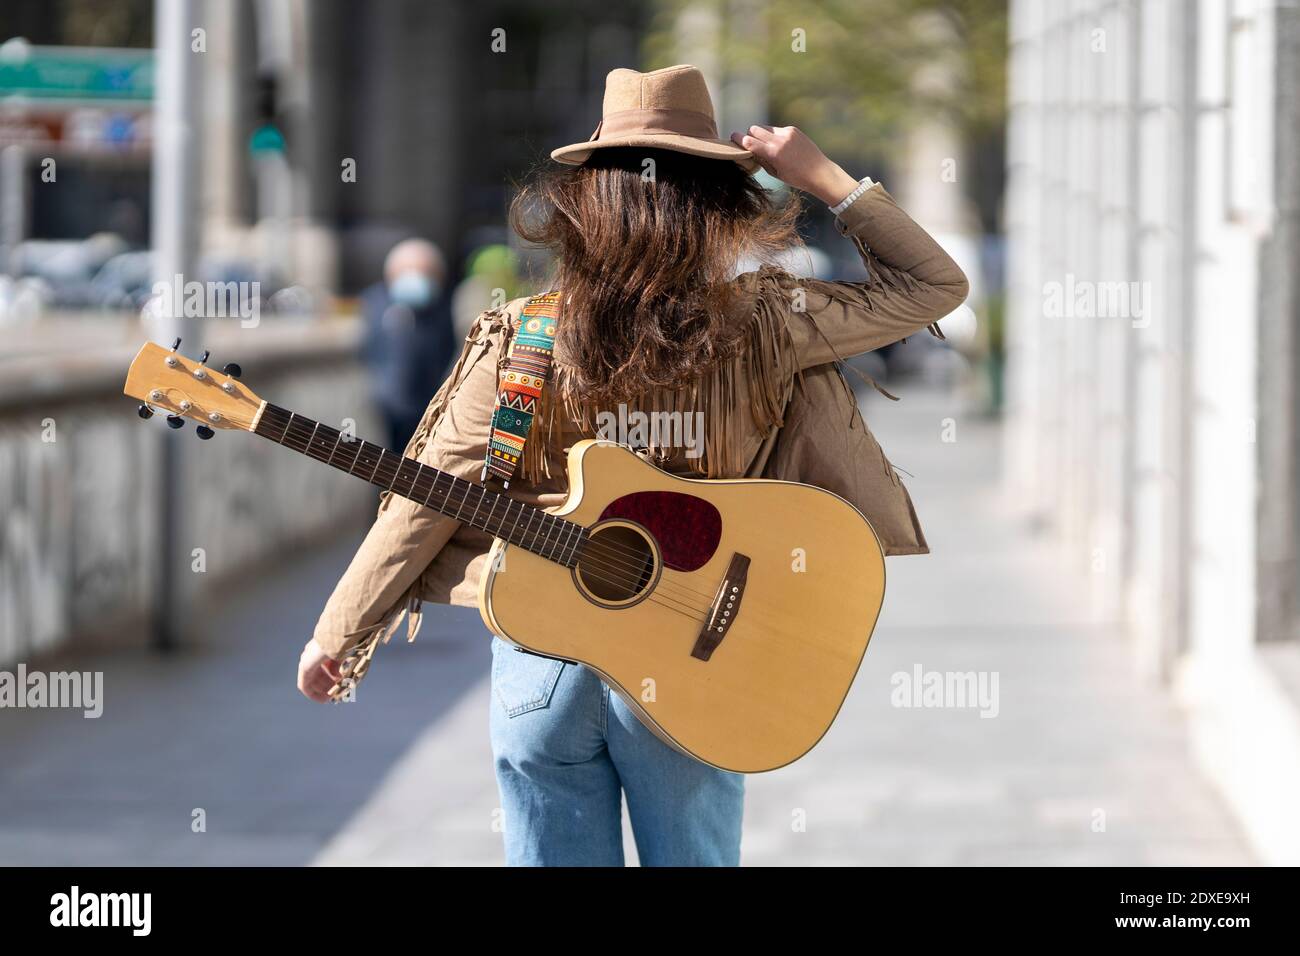 Young woman with guitar wearing hat walking on footpath in city Stock Photo